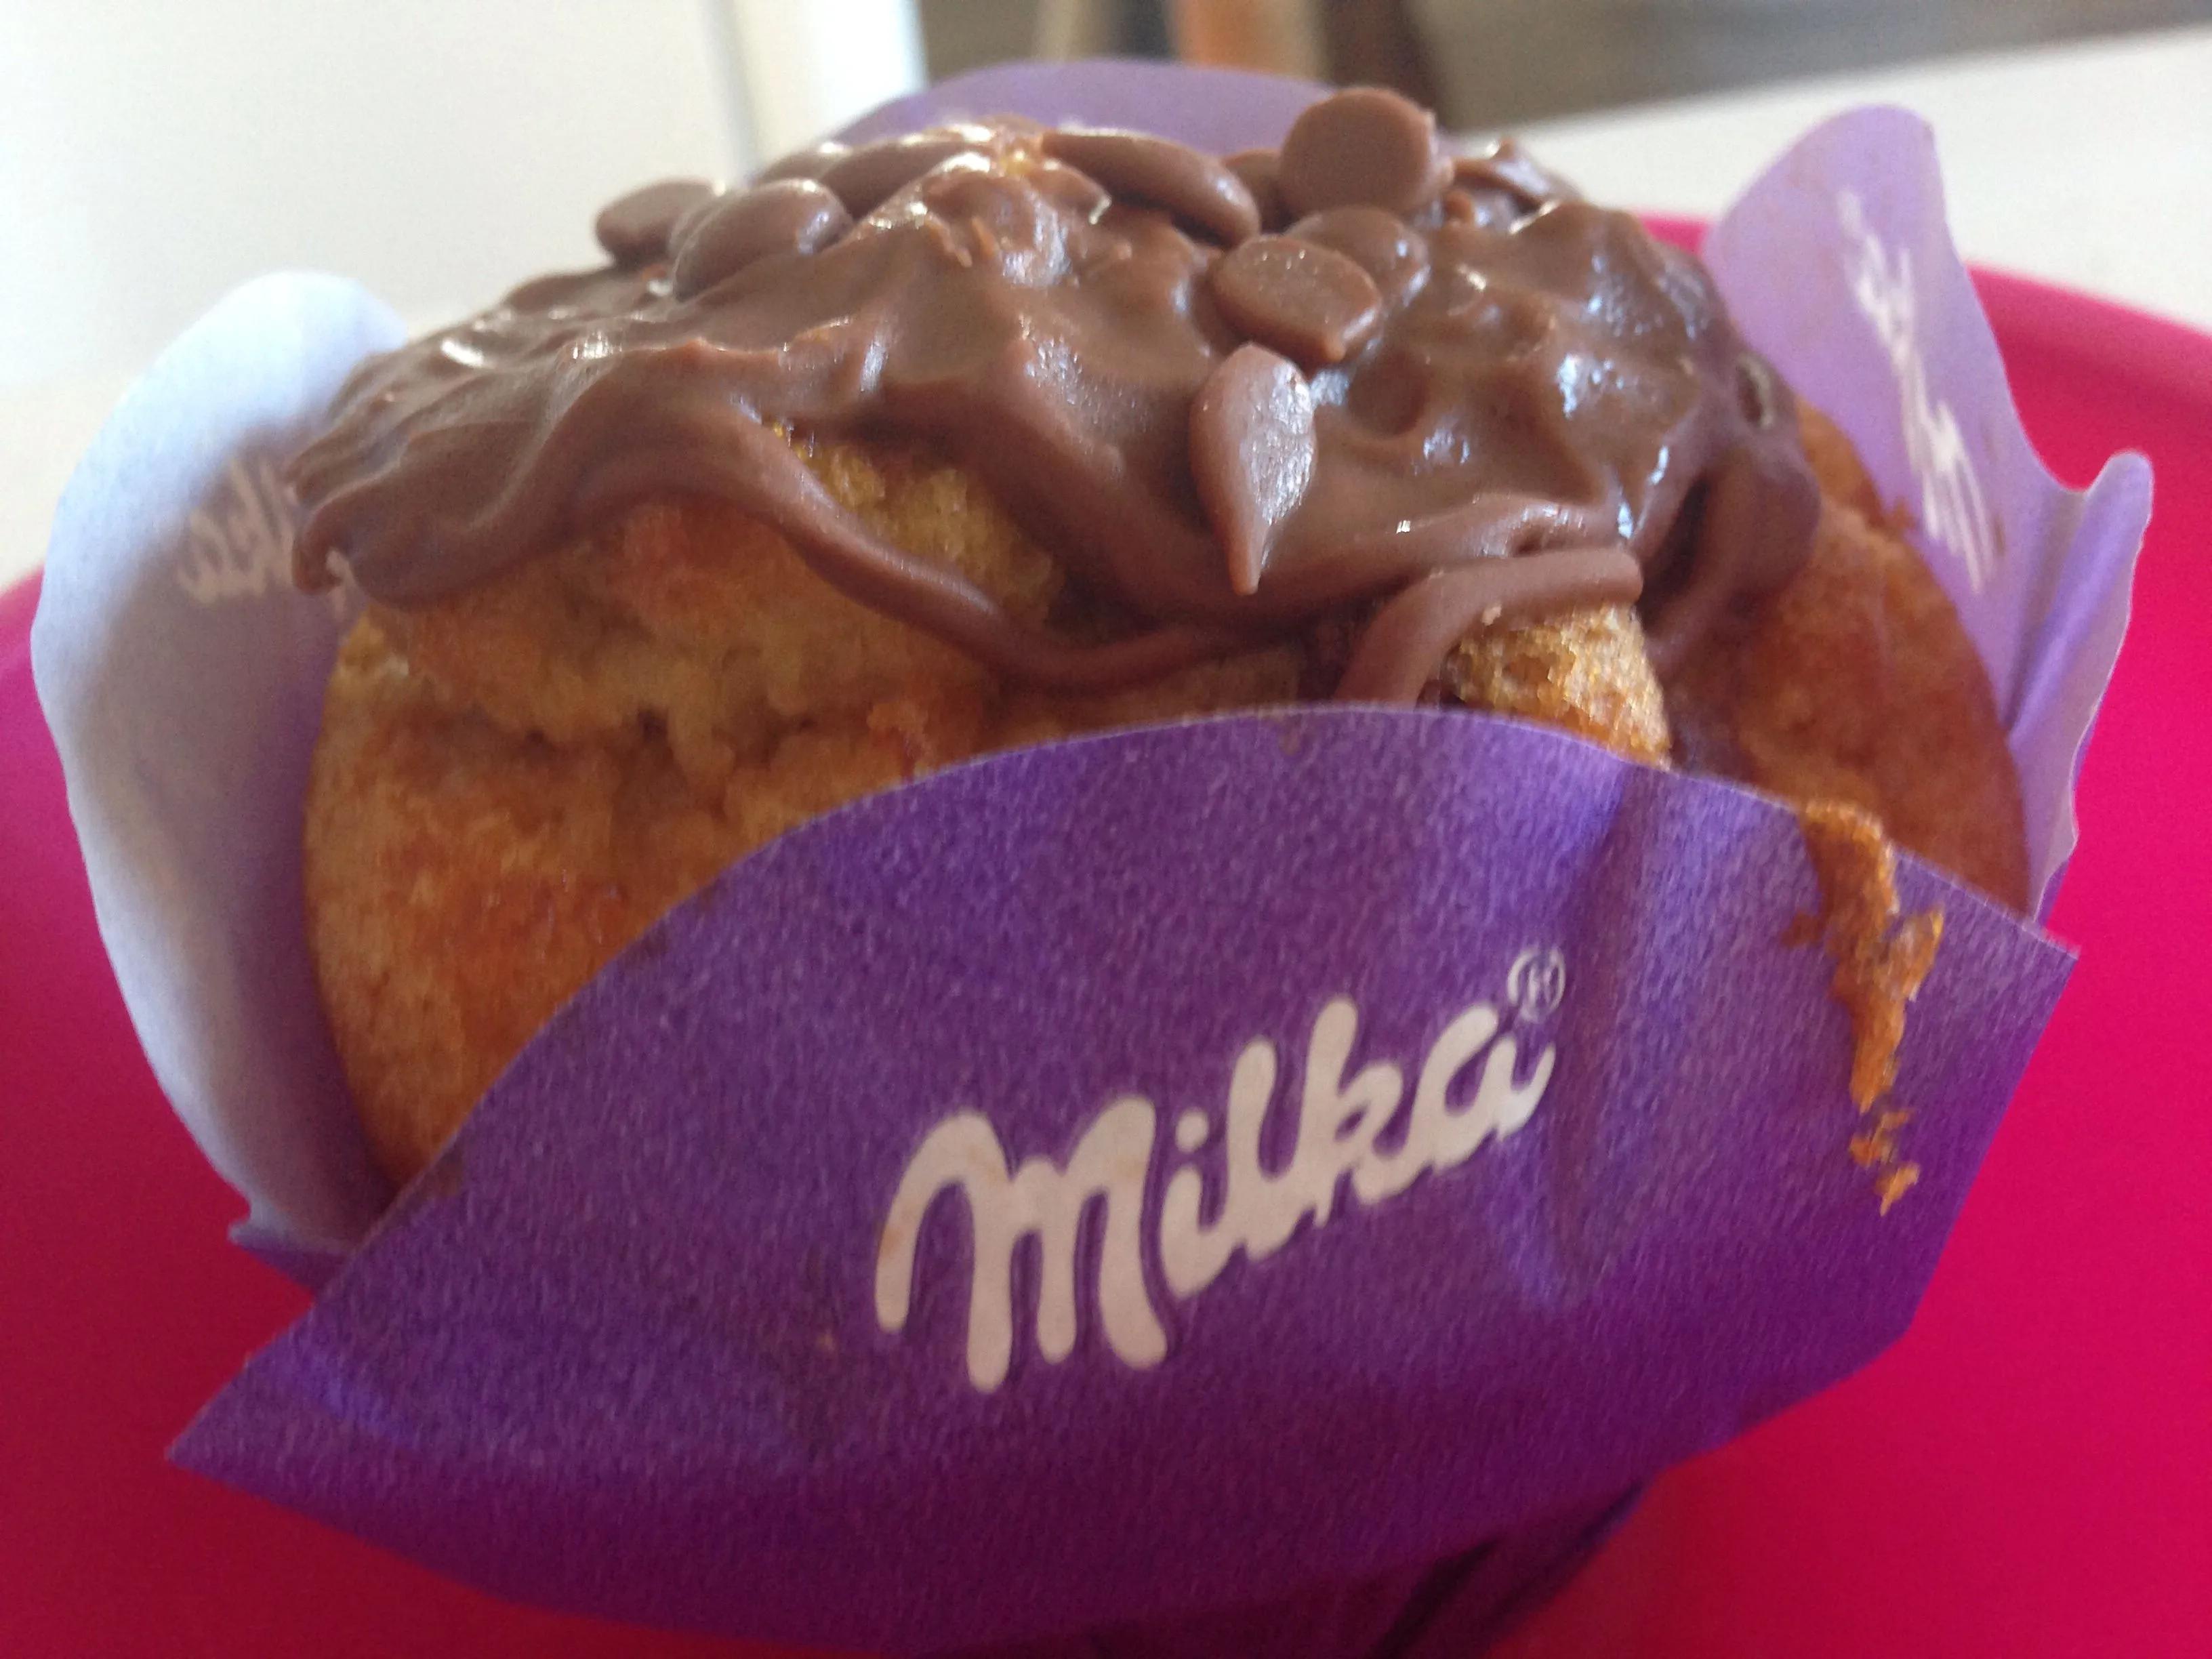 Milka muffin Muffin, Food And Drink, Cookies, Chocolate, Sport, Healthy ...